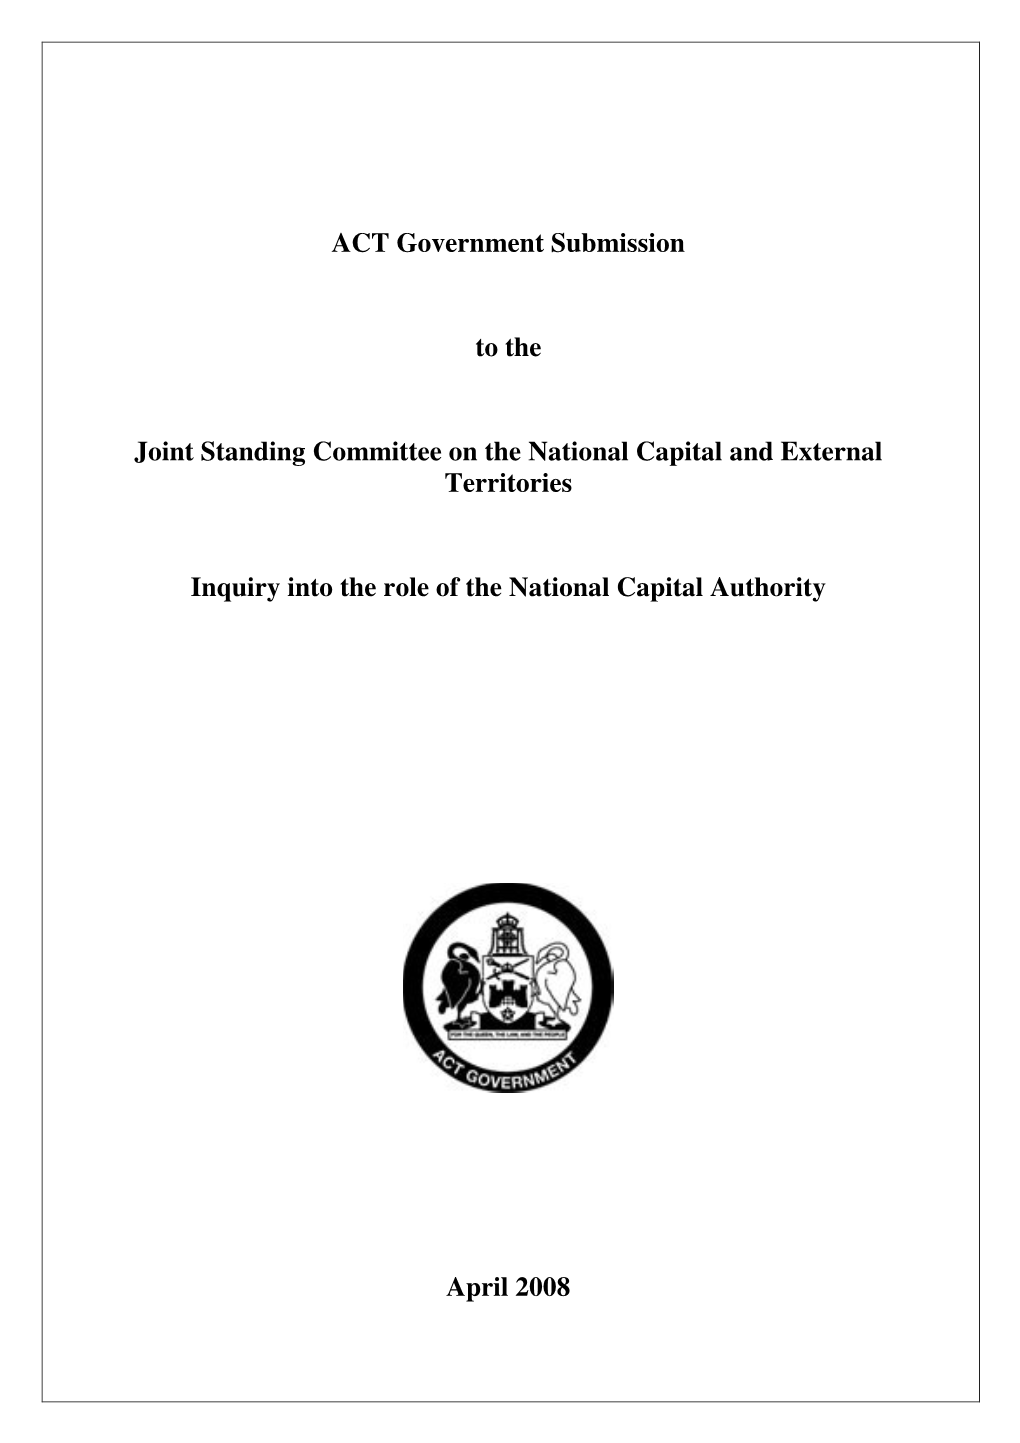 ACT Government Submission to the Joint Standing Committee on the National Capital and External Territories Inquiry Into the Role